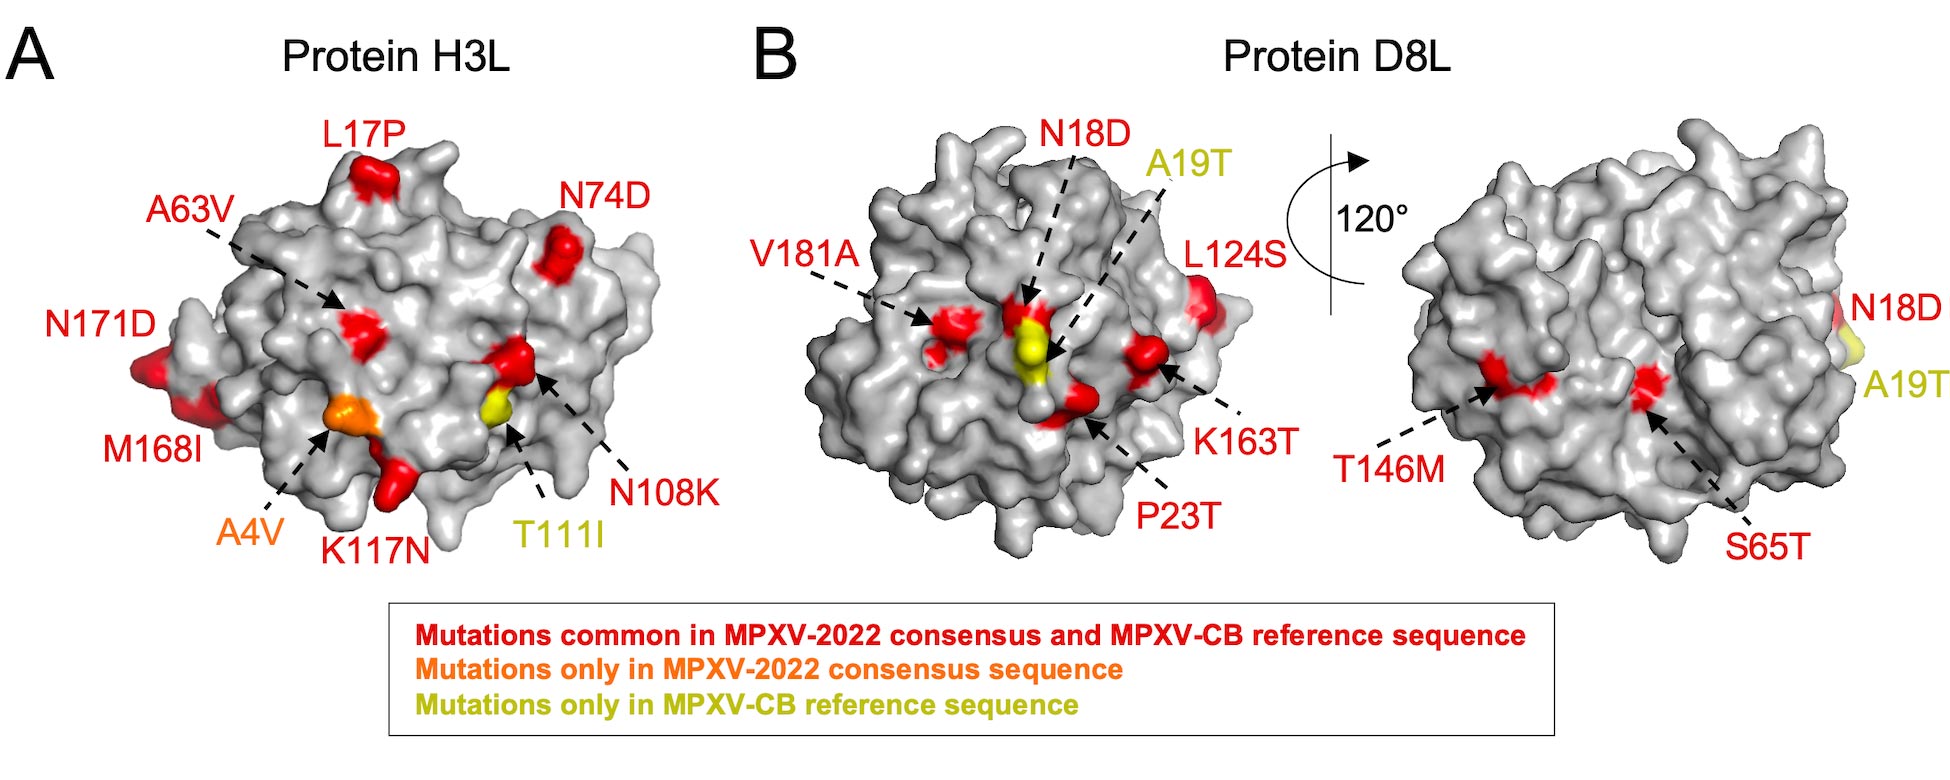 Figure 1. Mapping mutations observed in 2022 monkeypox viruses (MPXV-2022) and Congo Basin clade of monkeypox (MPXV-CB) on the structure available for vaccinia virus (VACV) surface proteins: (A) H3L [PDB ID: 5EJ0] and (B) D8L [PDB ID: 4E9O].